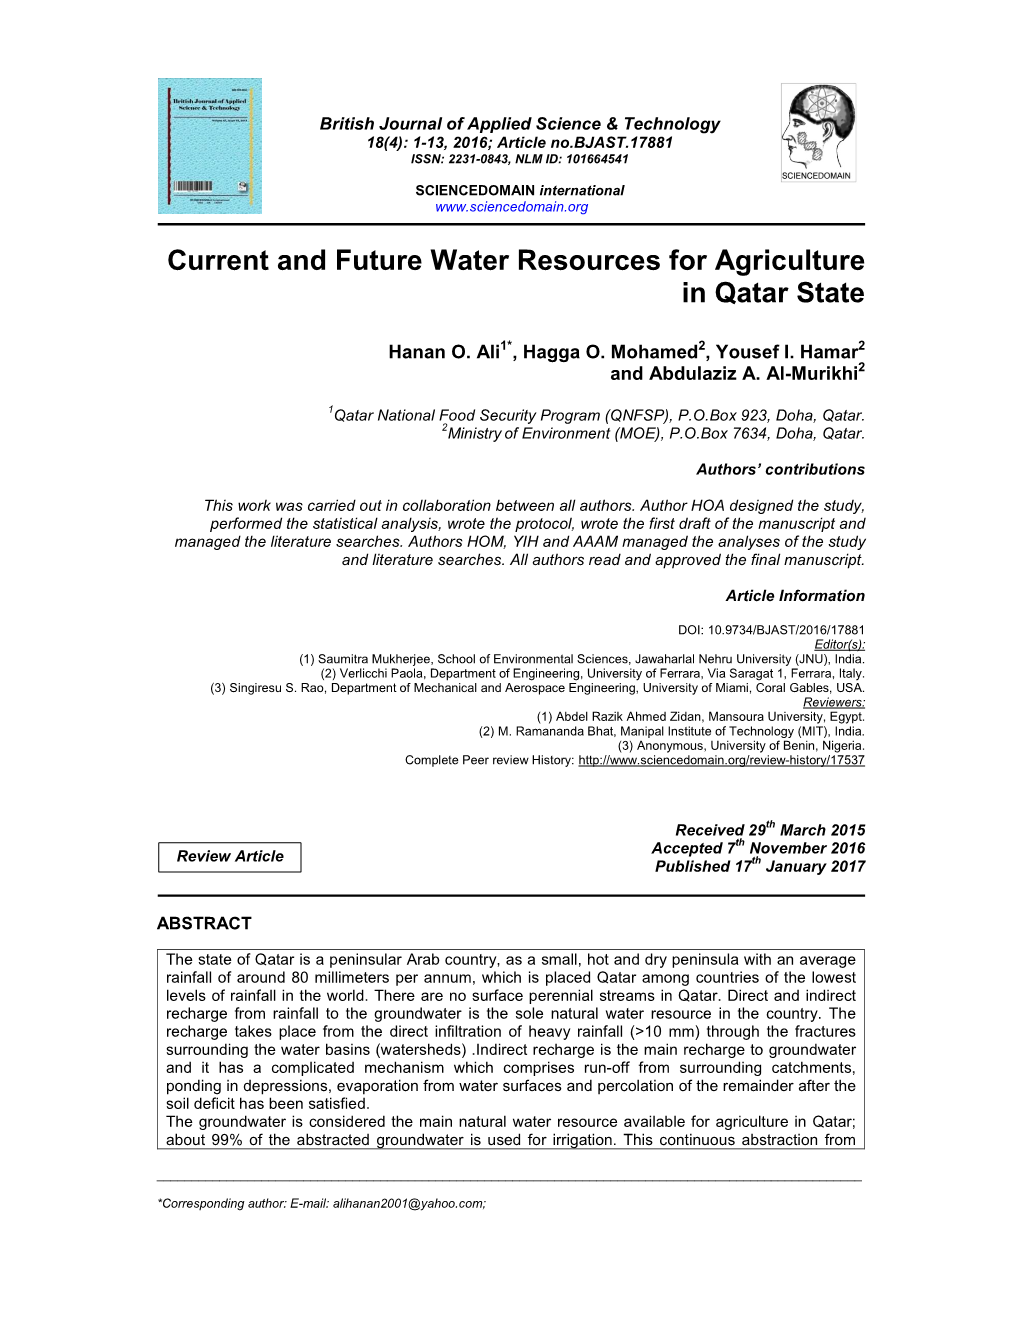 Current and Future Water Resources for Agriculture in Qatar State